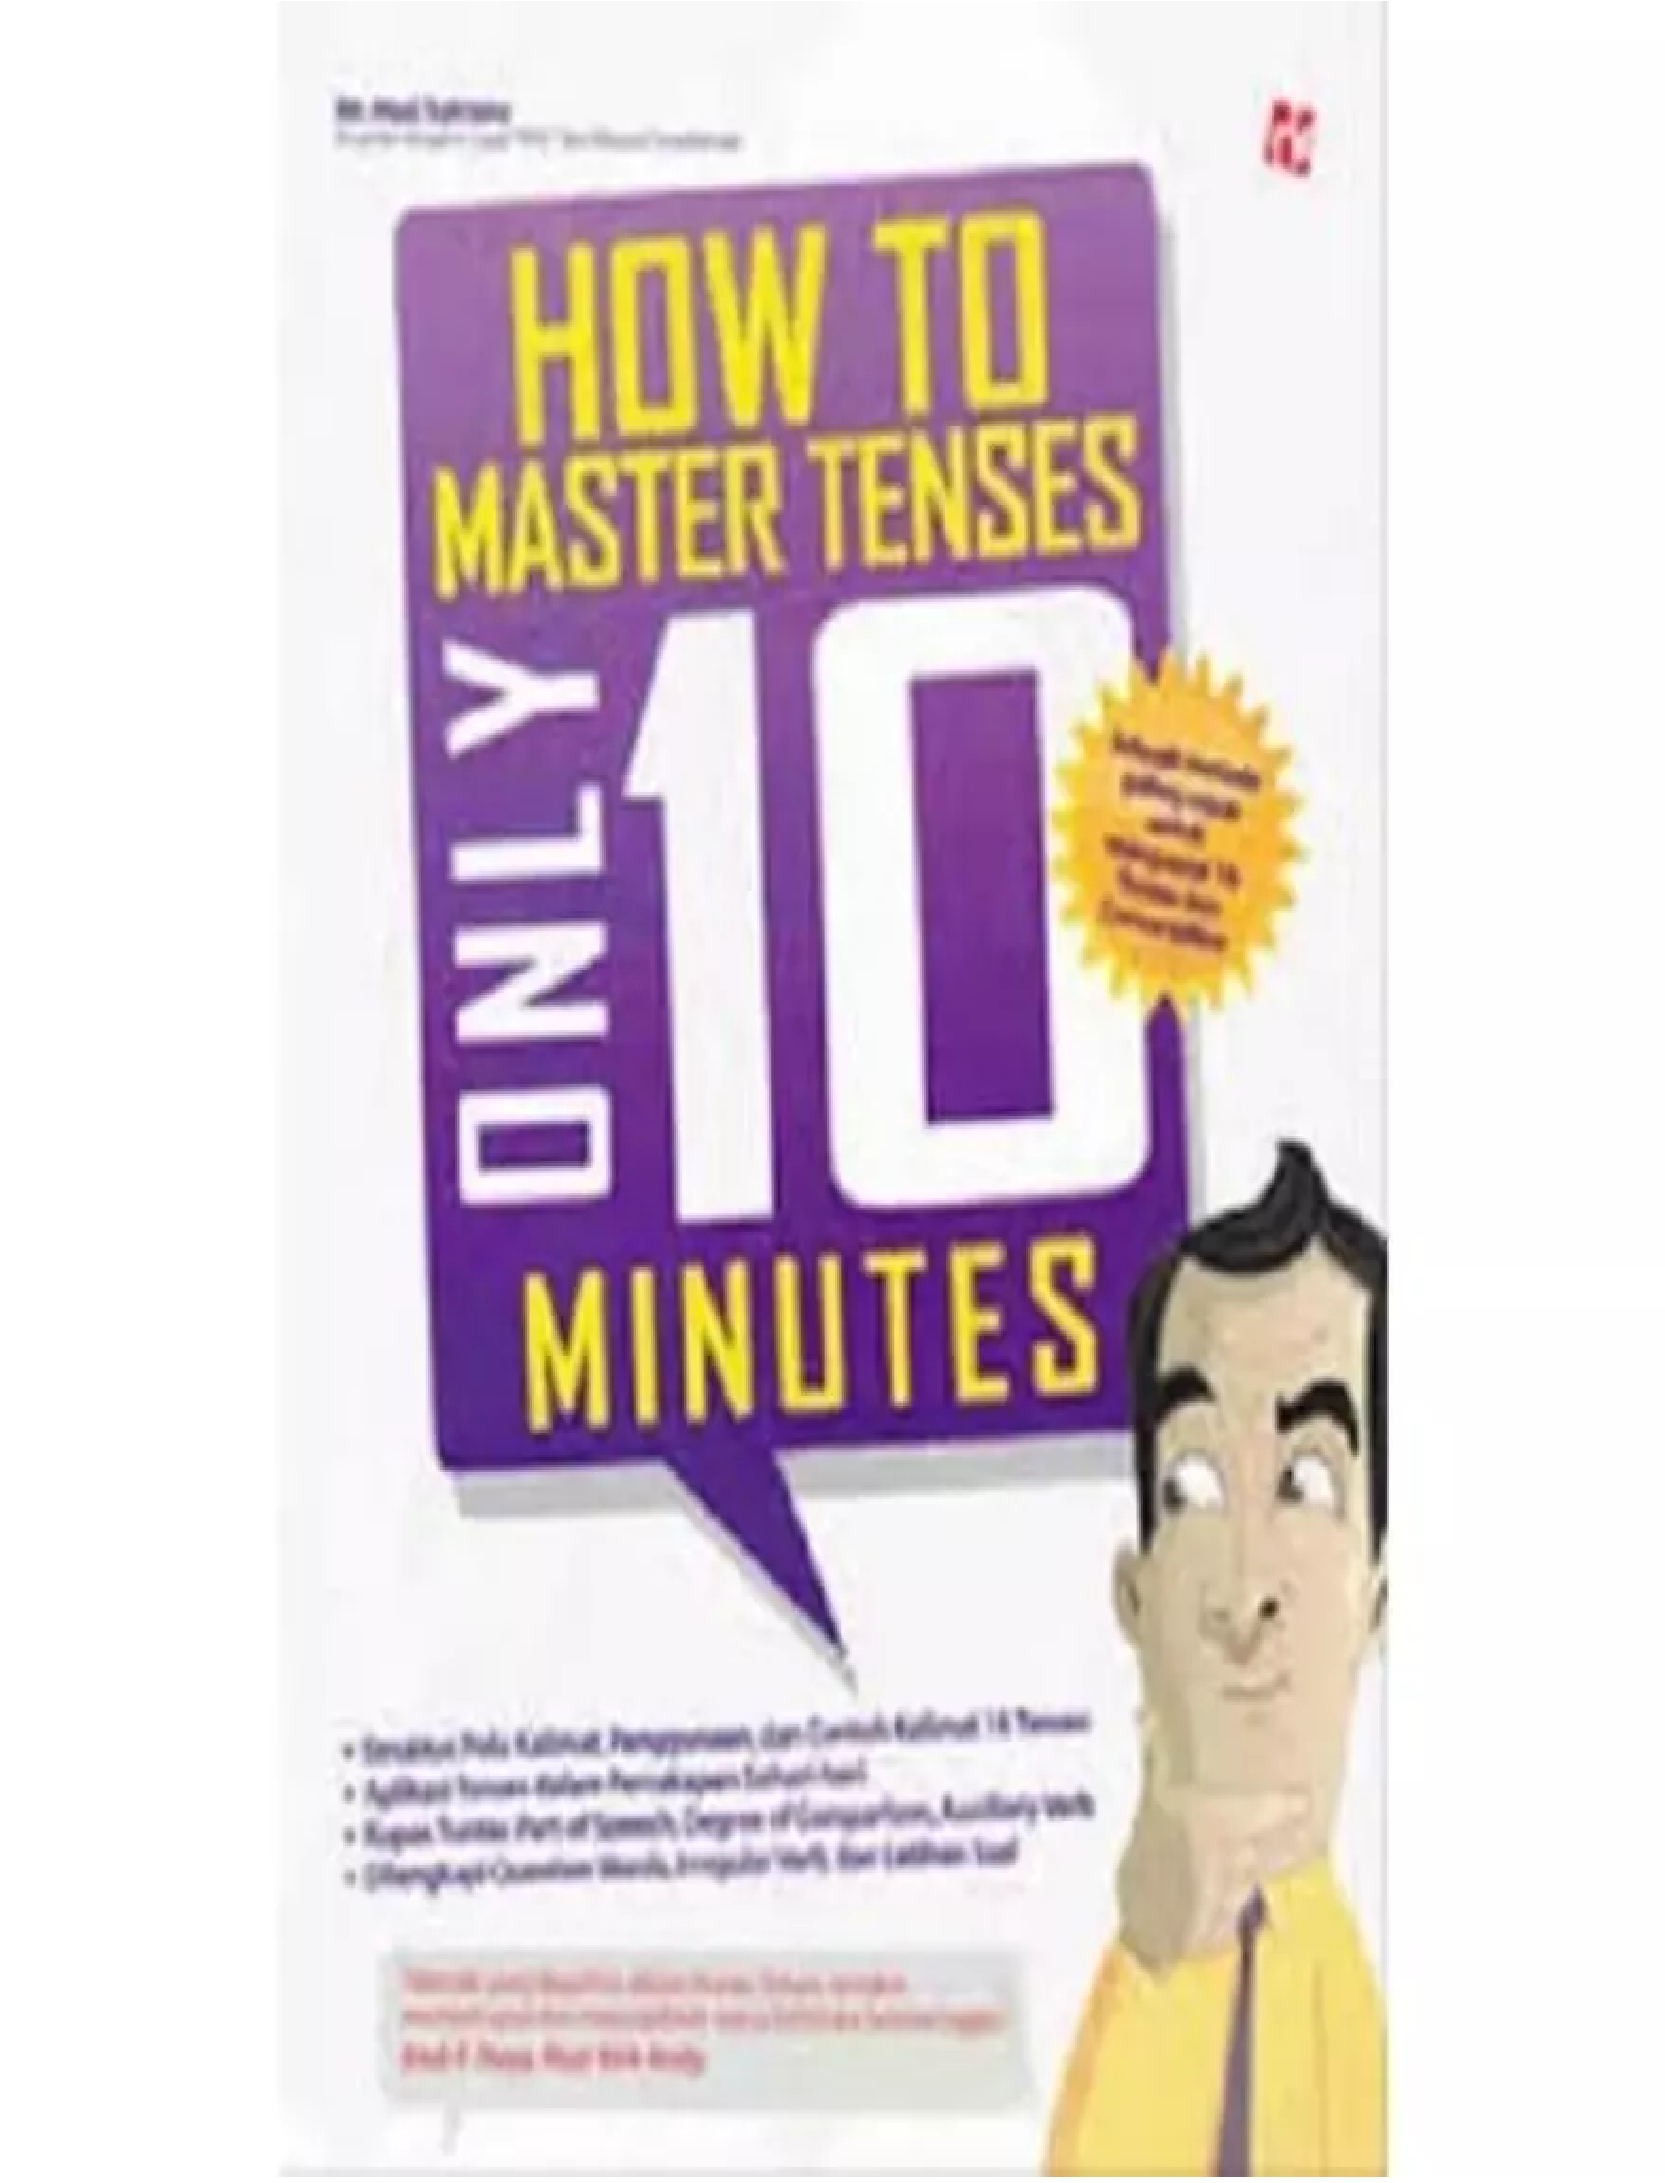 How to master tenses omly 10 minutes